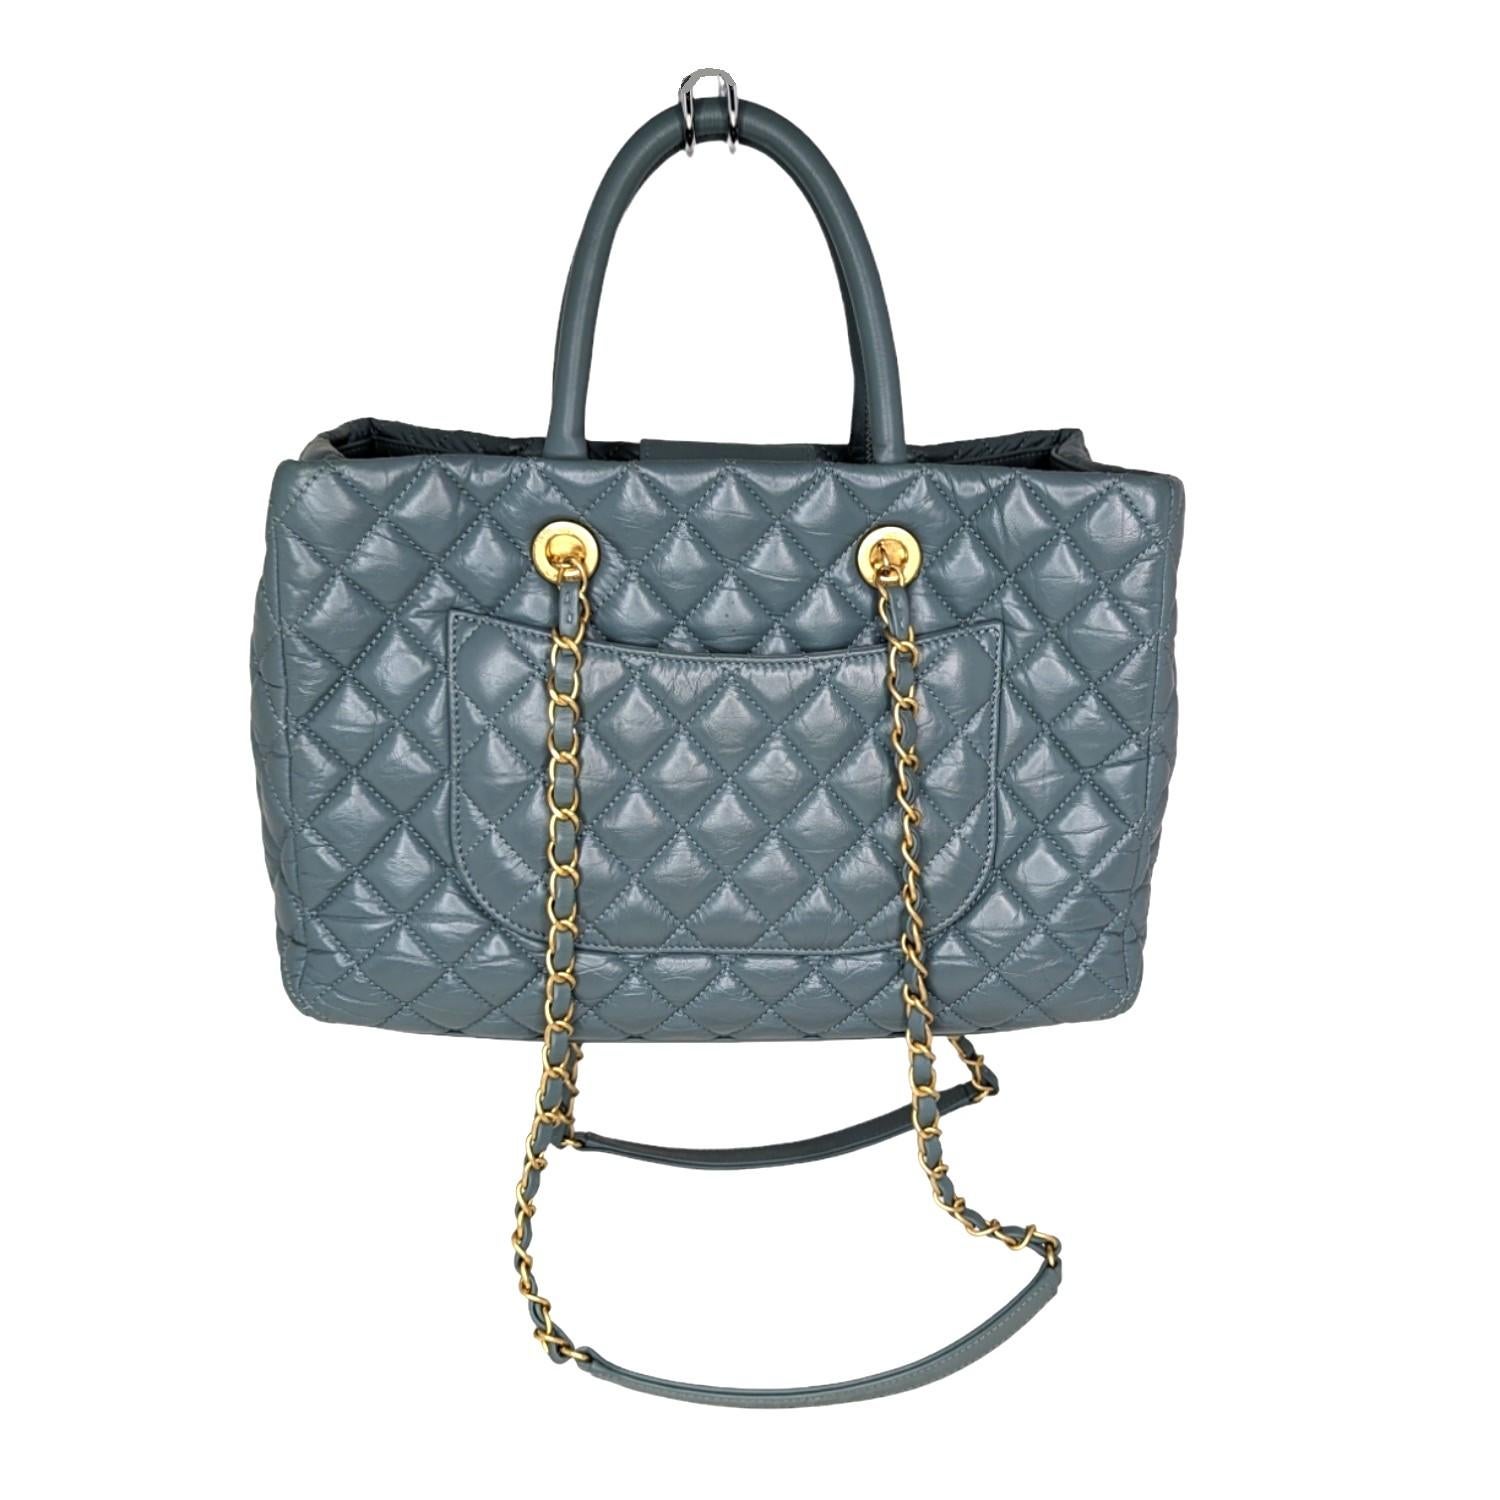 This handbag is crafted of diamond quilted blue aged Calfskin leather. This tote features leather threaded aged gold chain shoulder straps with shoulder pads, rolled top handles, an aged gold Chanel CC logo on the front, a flat pocket on the back.